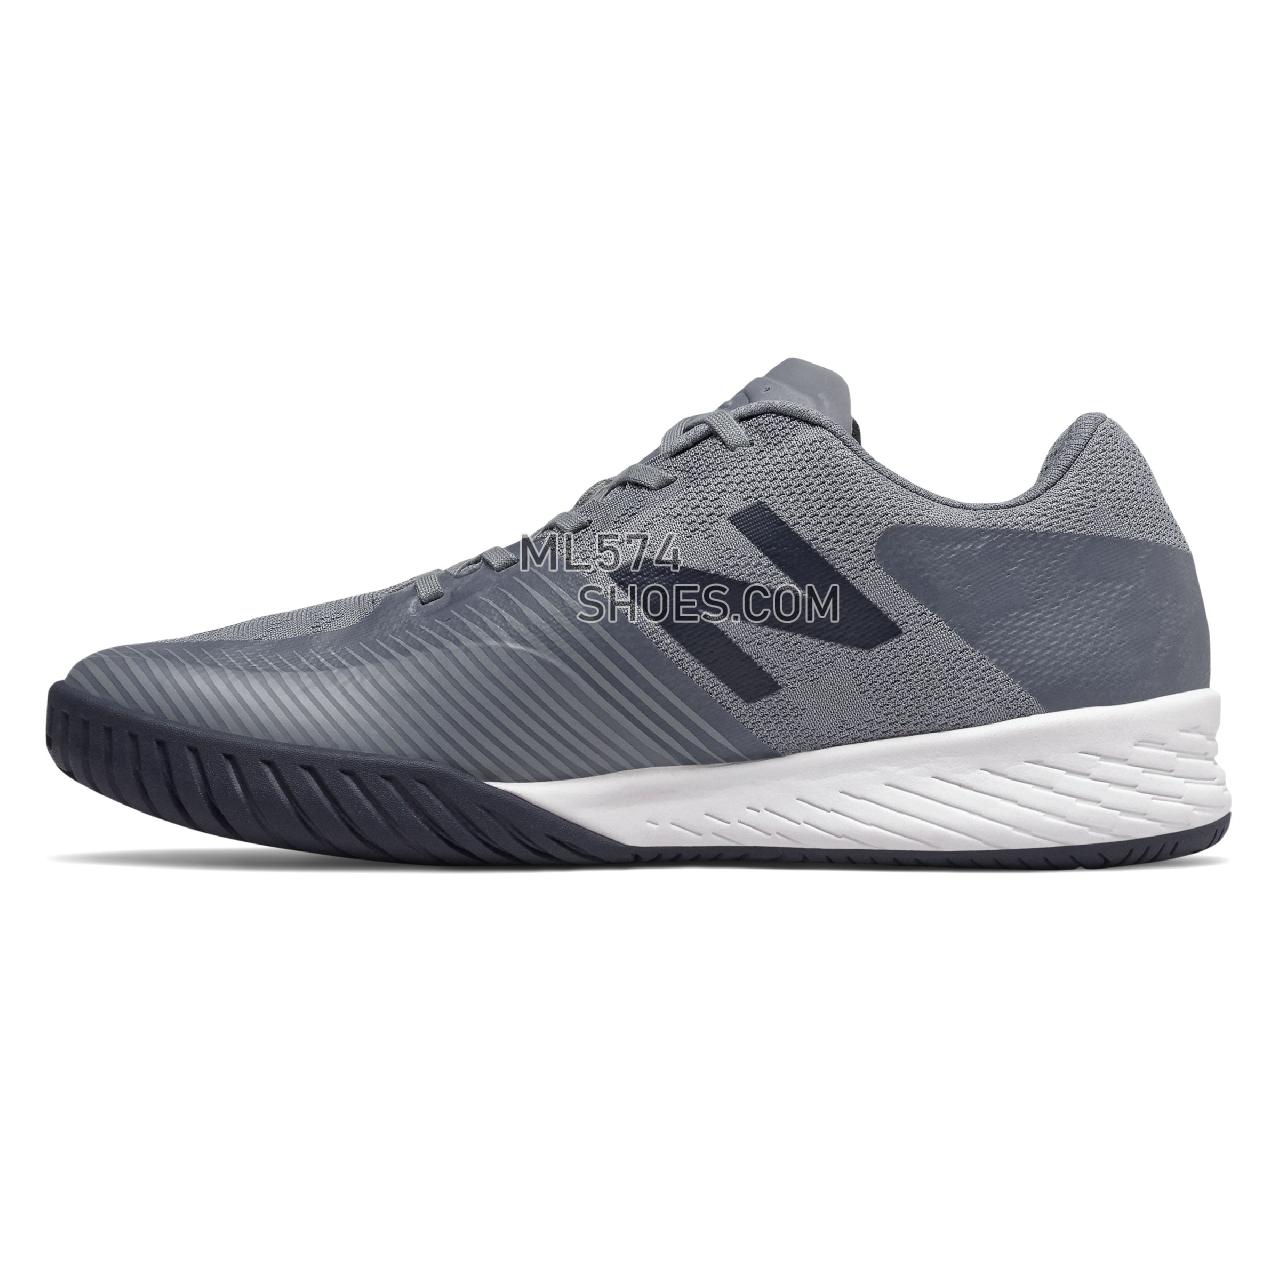 New Balance 896v3 - Men's Tennis - Grey with Pigment - MCH896N3